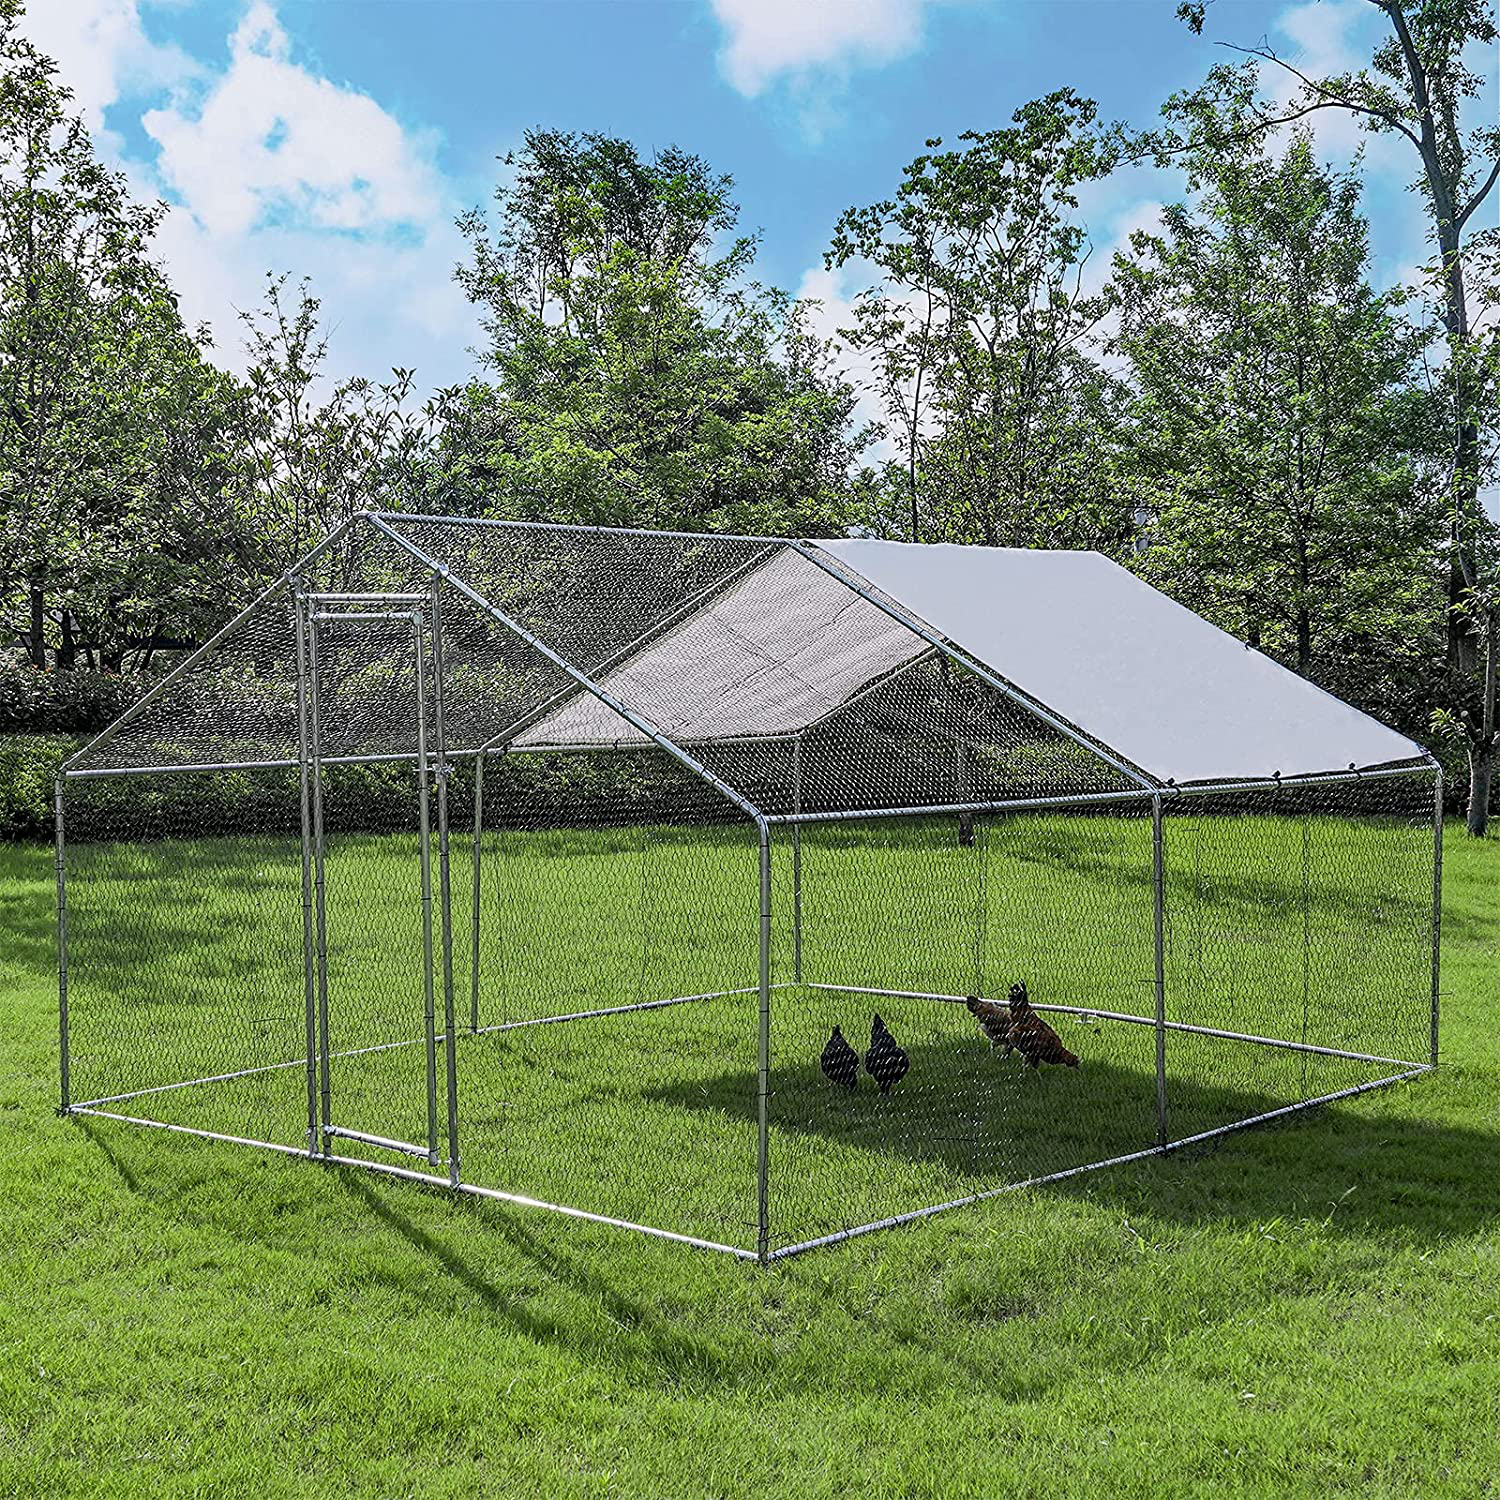 Chicken Coop, Large Metal Chicken Coop Walk in Poultry Cage Hen Run House Rabbits Cage with Waterproof & Anti-Uv Cover, Galvanized Steel Coops for Outdoor Backyard Farm Garden Animals & Pet Supplies > Pet Supplies > Dog Supplies > Dog Kennels & Runs JOIONE 9.8'L x 13.1'W x 6.5'H  